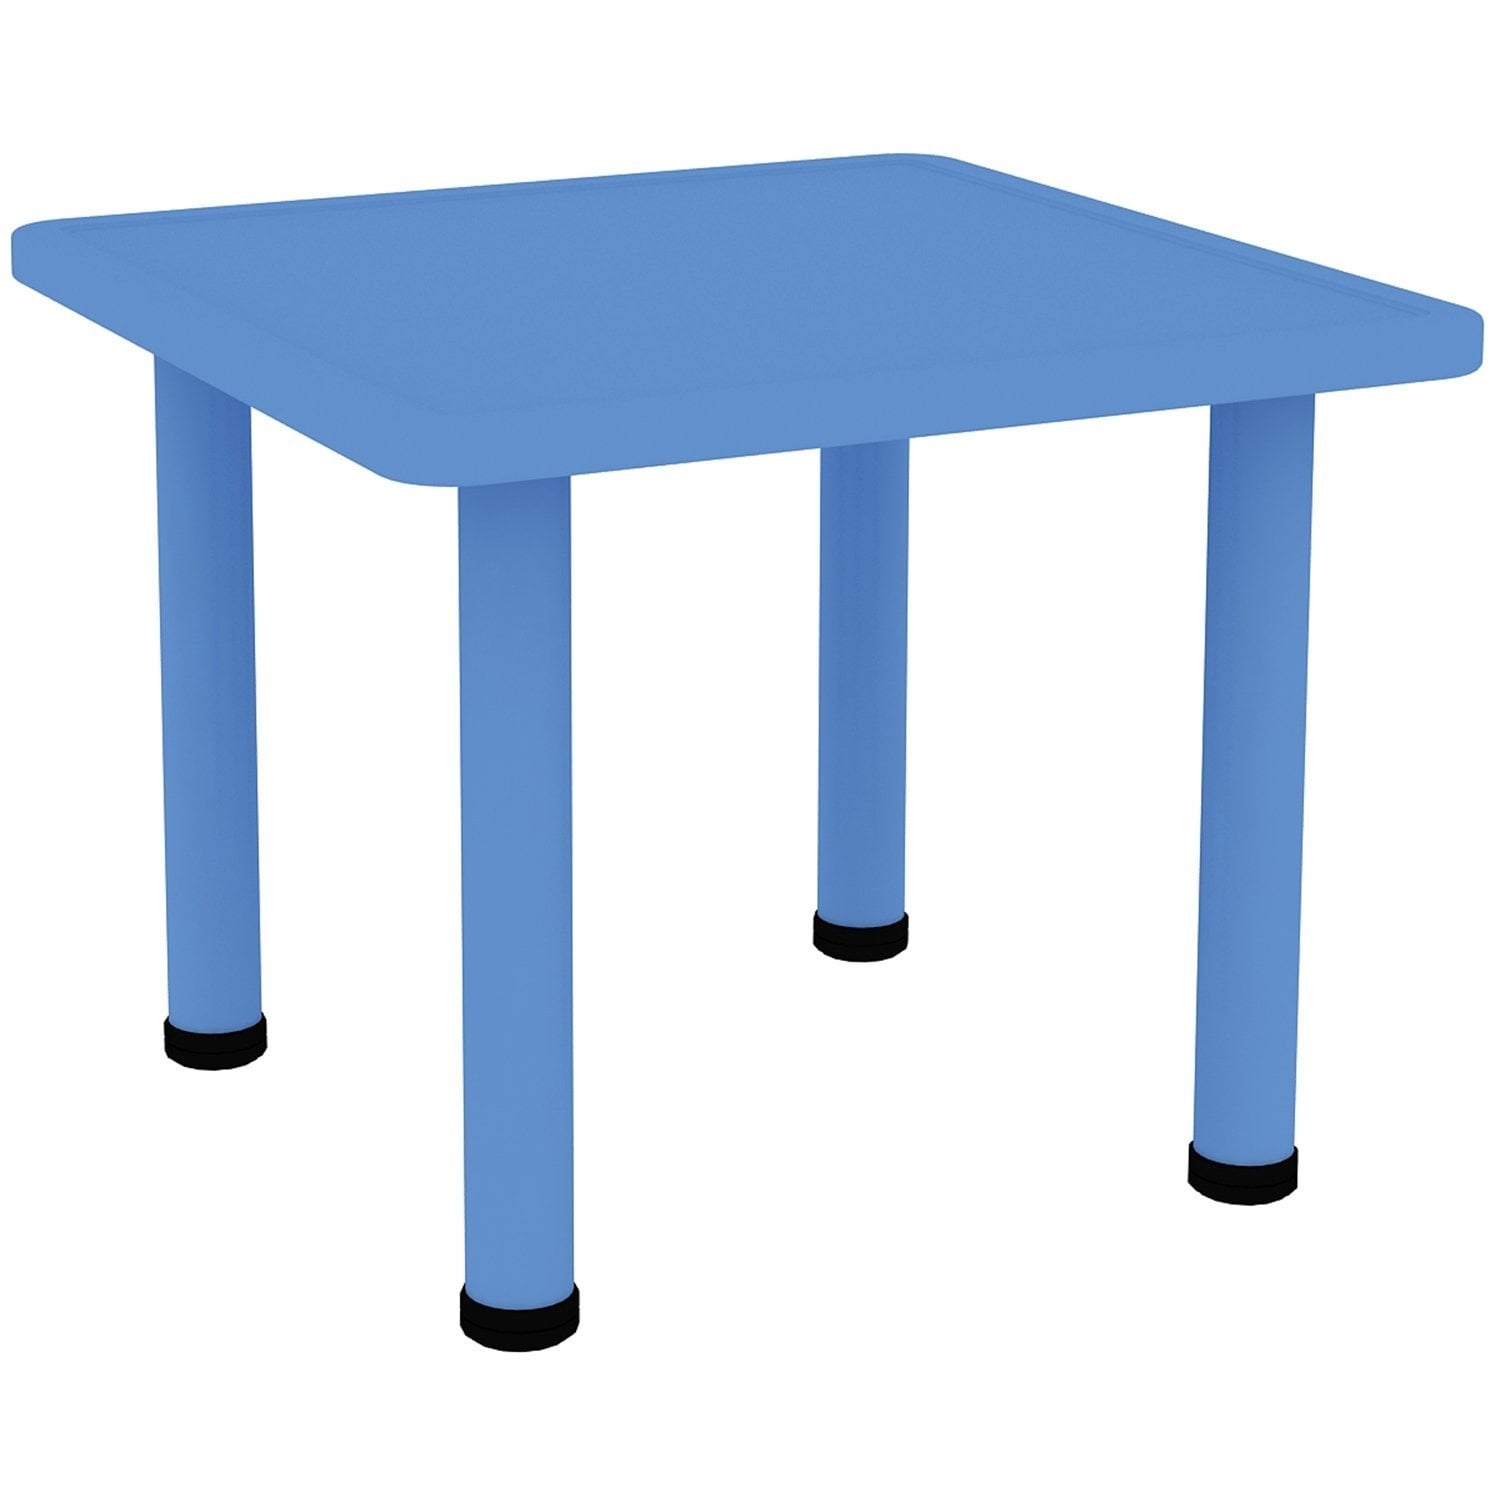 https://ak1.ostkcdn.com/images/products/is/images/direct/d4cc7614f7f14ba1dc8ecb4c38aa85b9291beedf/2xhome---Blue---Kids-Table---Height-Adjustable-21.5%22-to-22.5%22-Square-Shaped-Plastic-Activity-Table-with-Metal-Legs-24%22-x-24%22.jpg